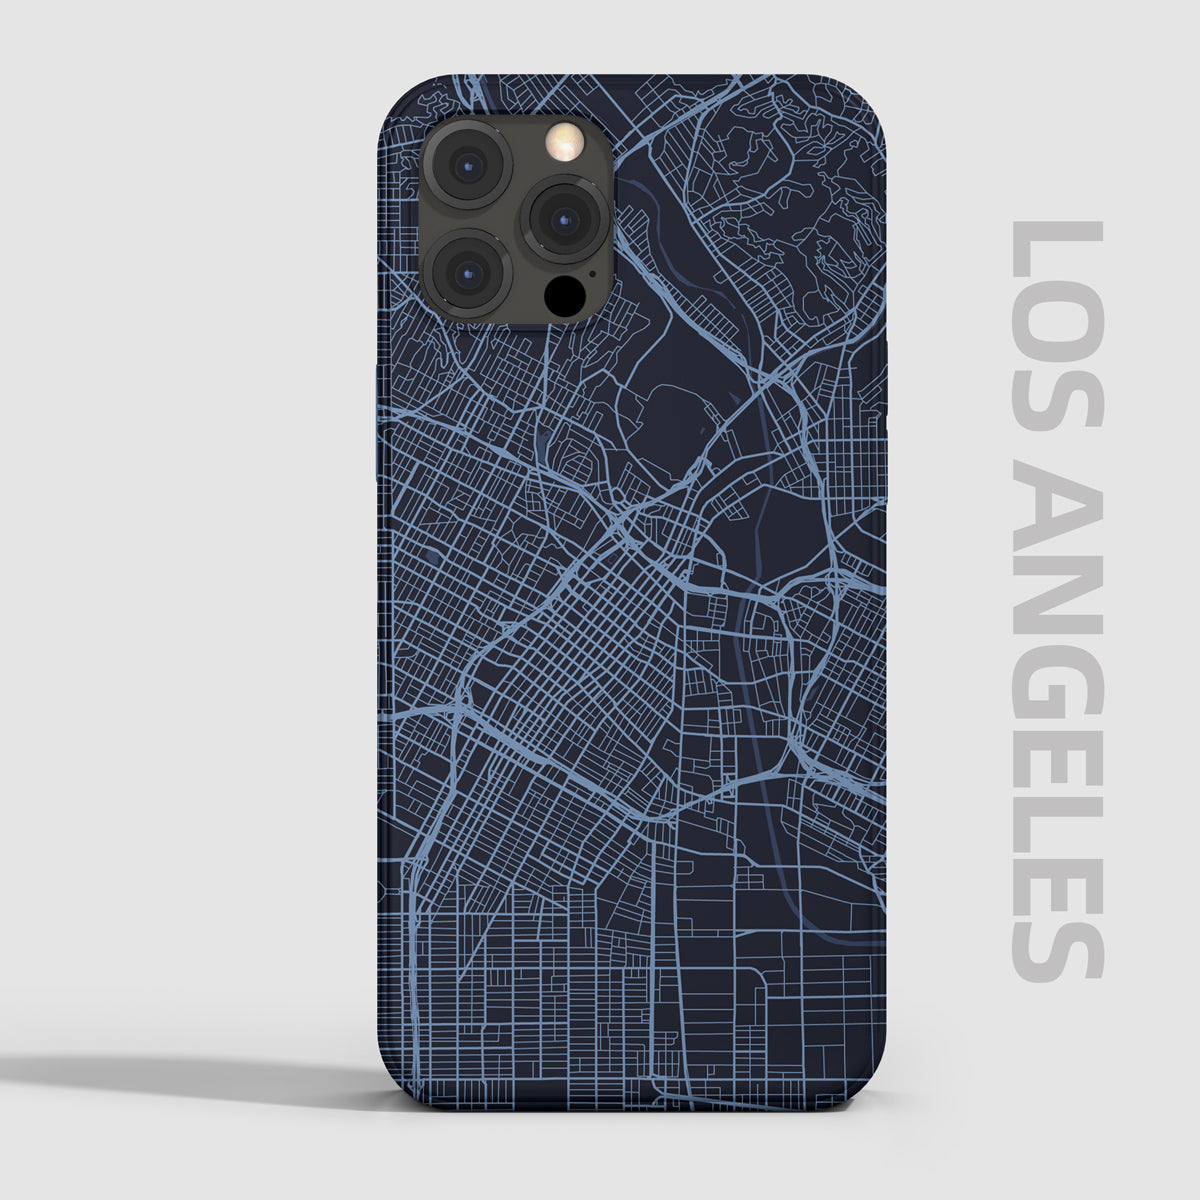 Los Angeles California United States Phone Case city map landscape. Apple Huawei XIiaomi iPhone Android Samsung